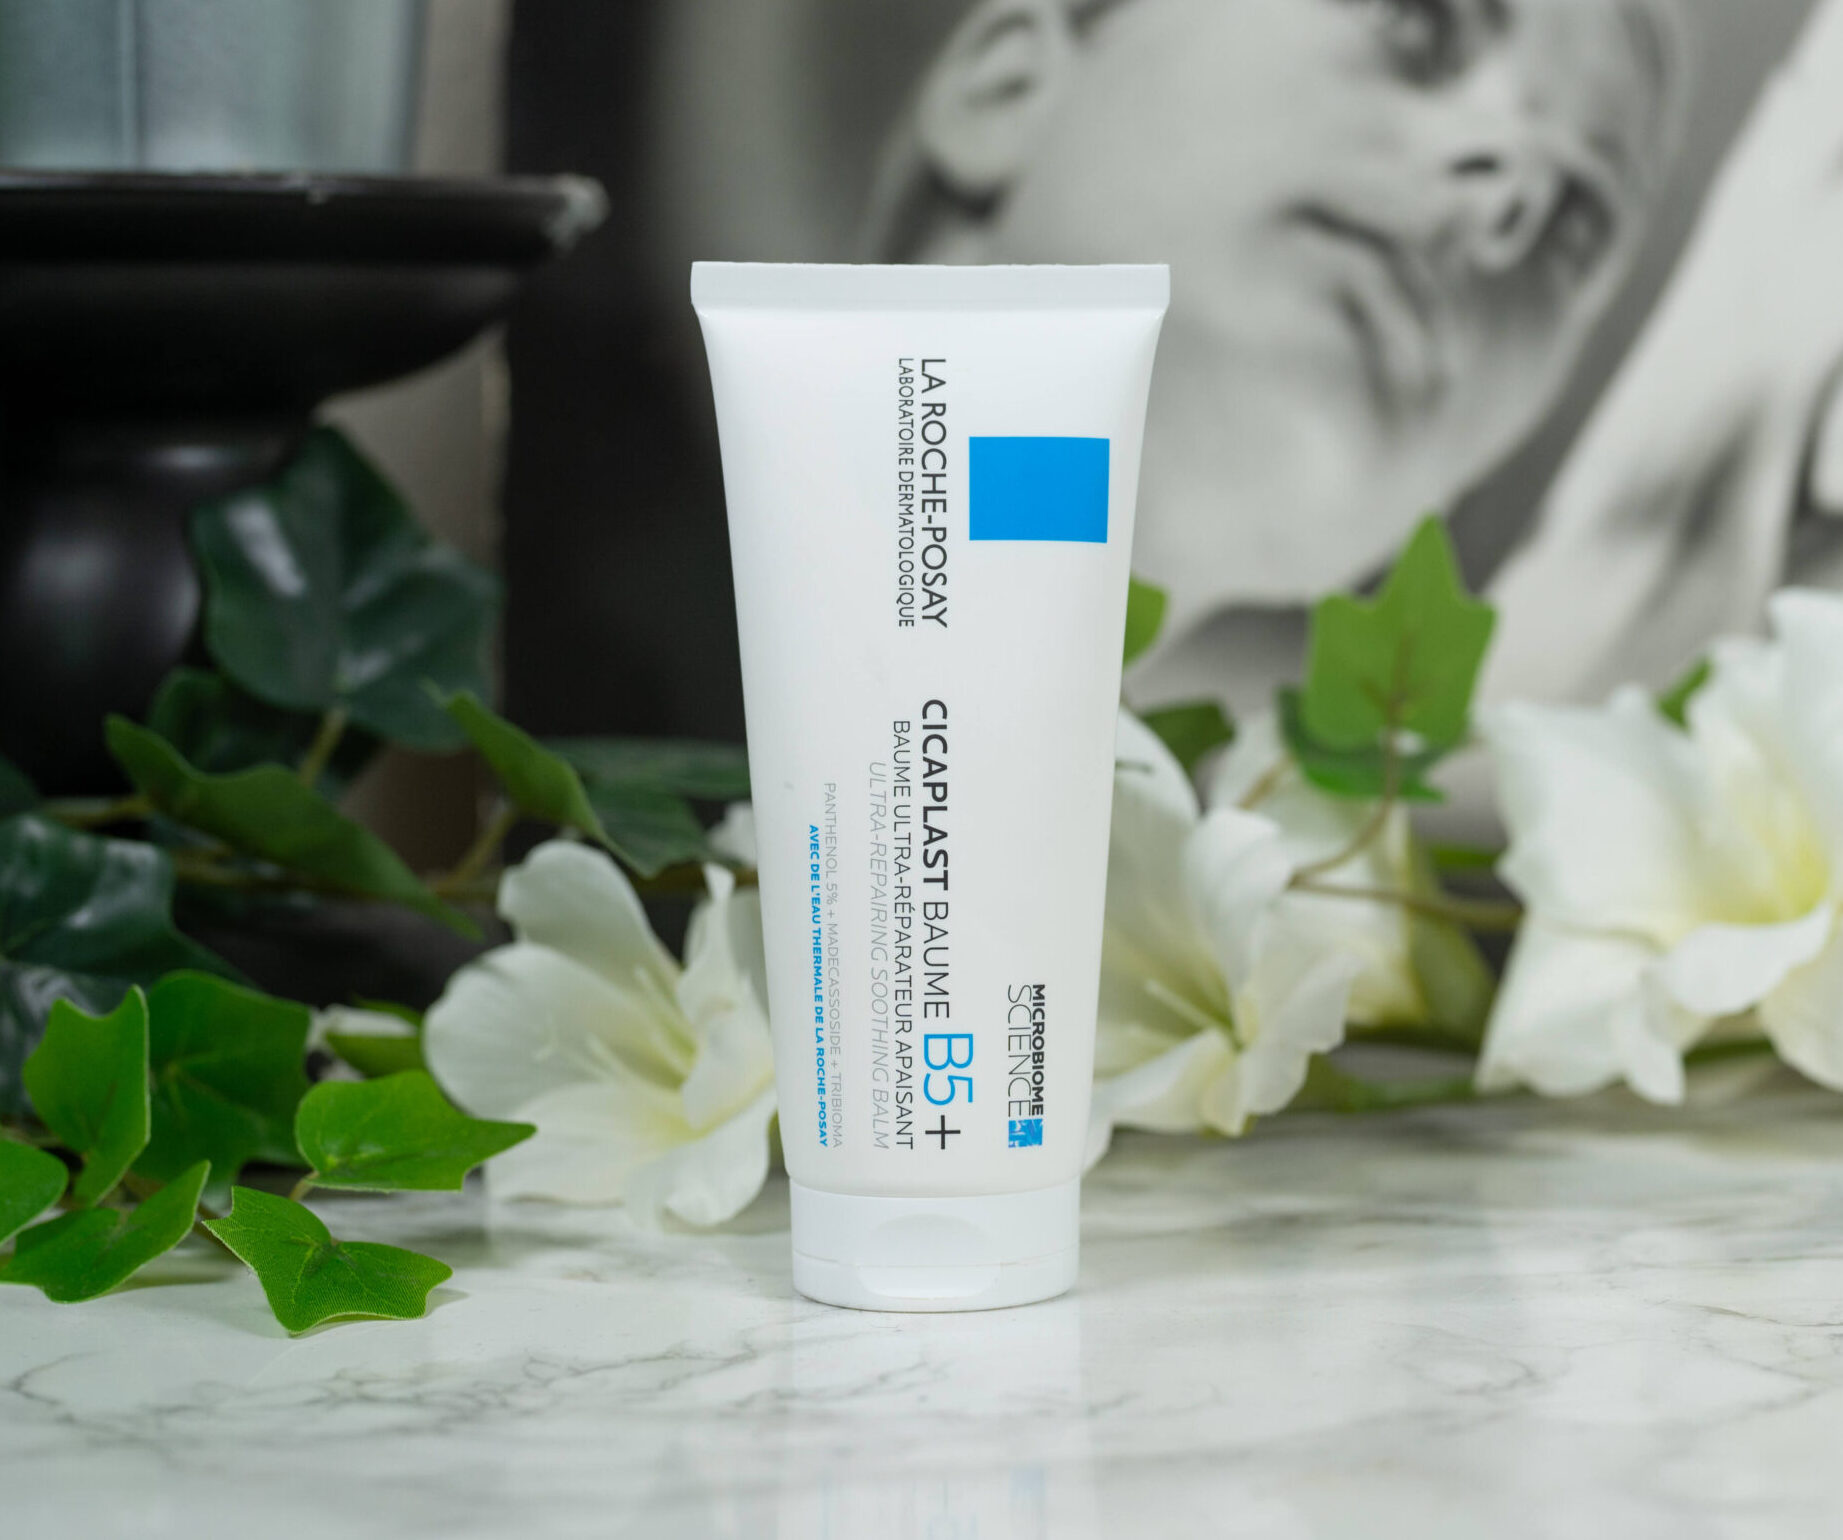 “La Roche-Posay Cicaplast Baume B5+” Is The Salvation For Dry And Irritated Skin